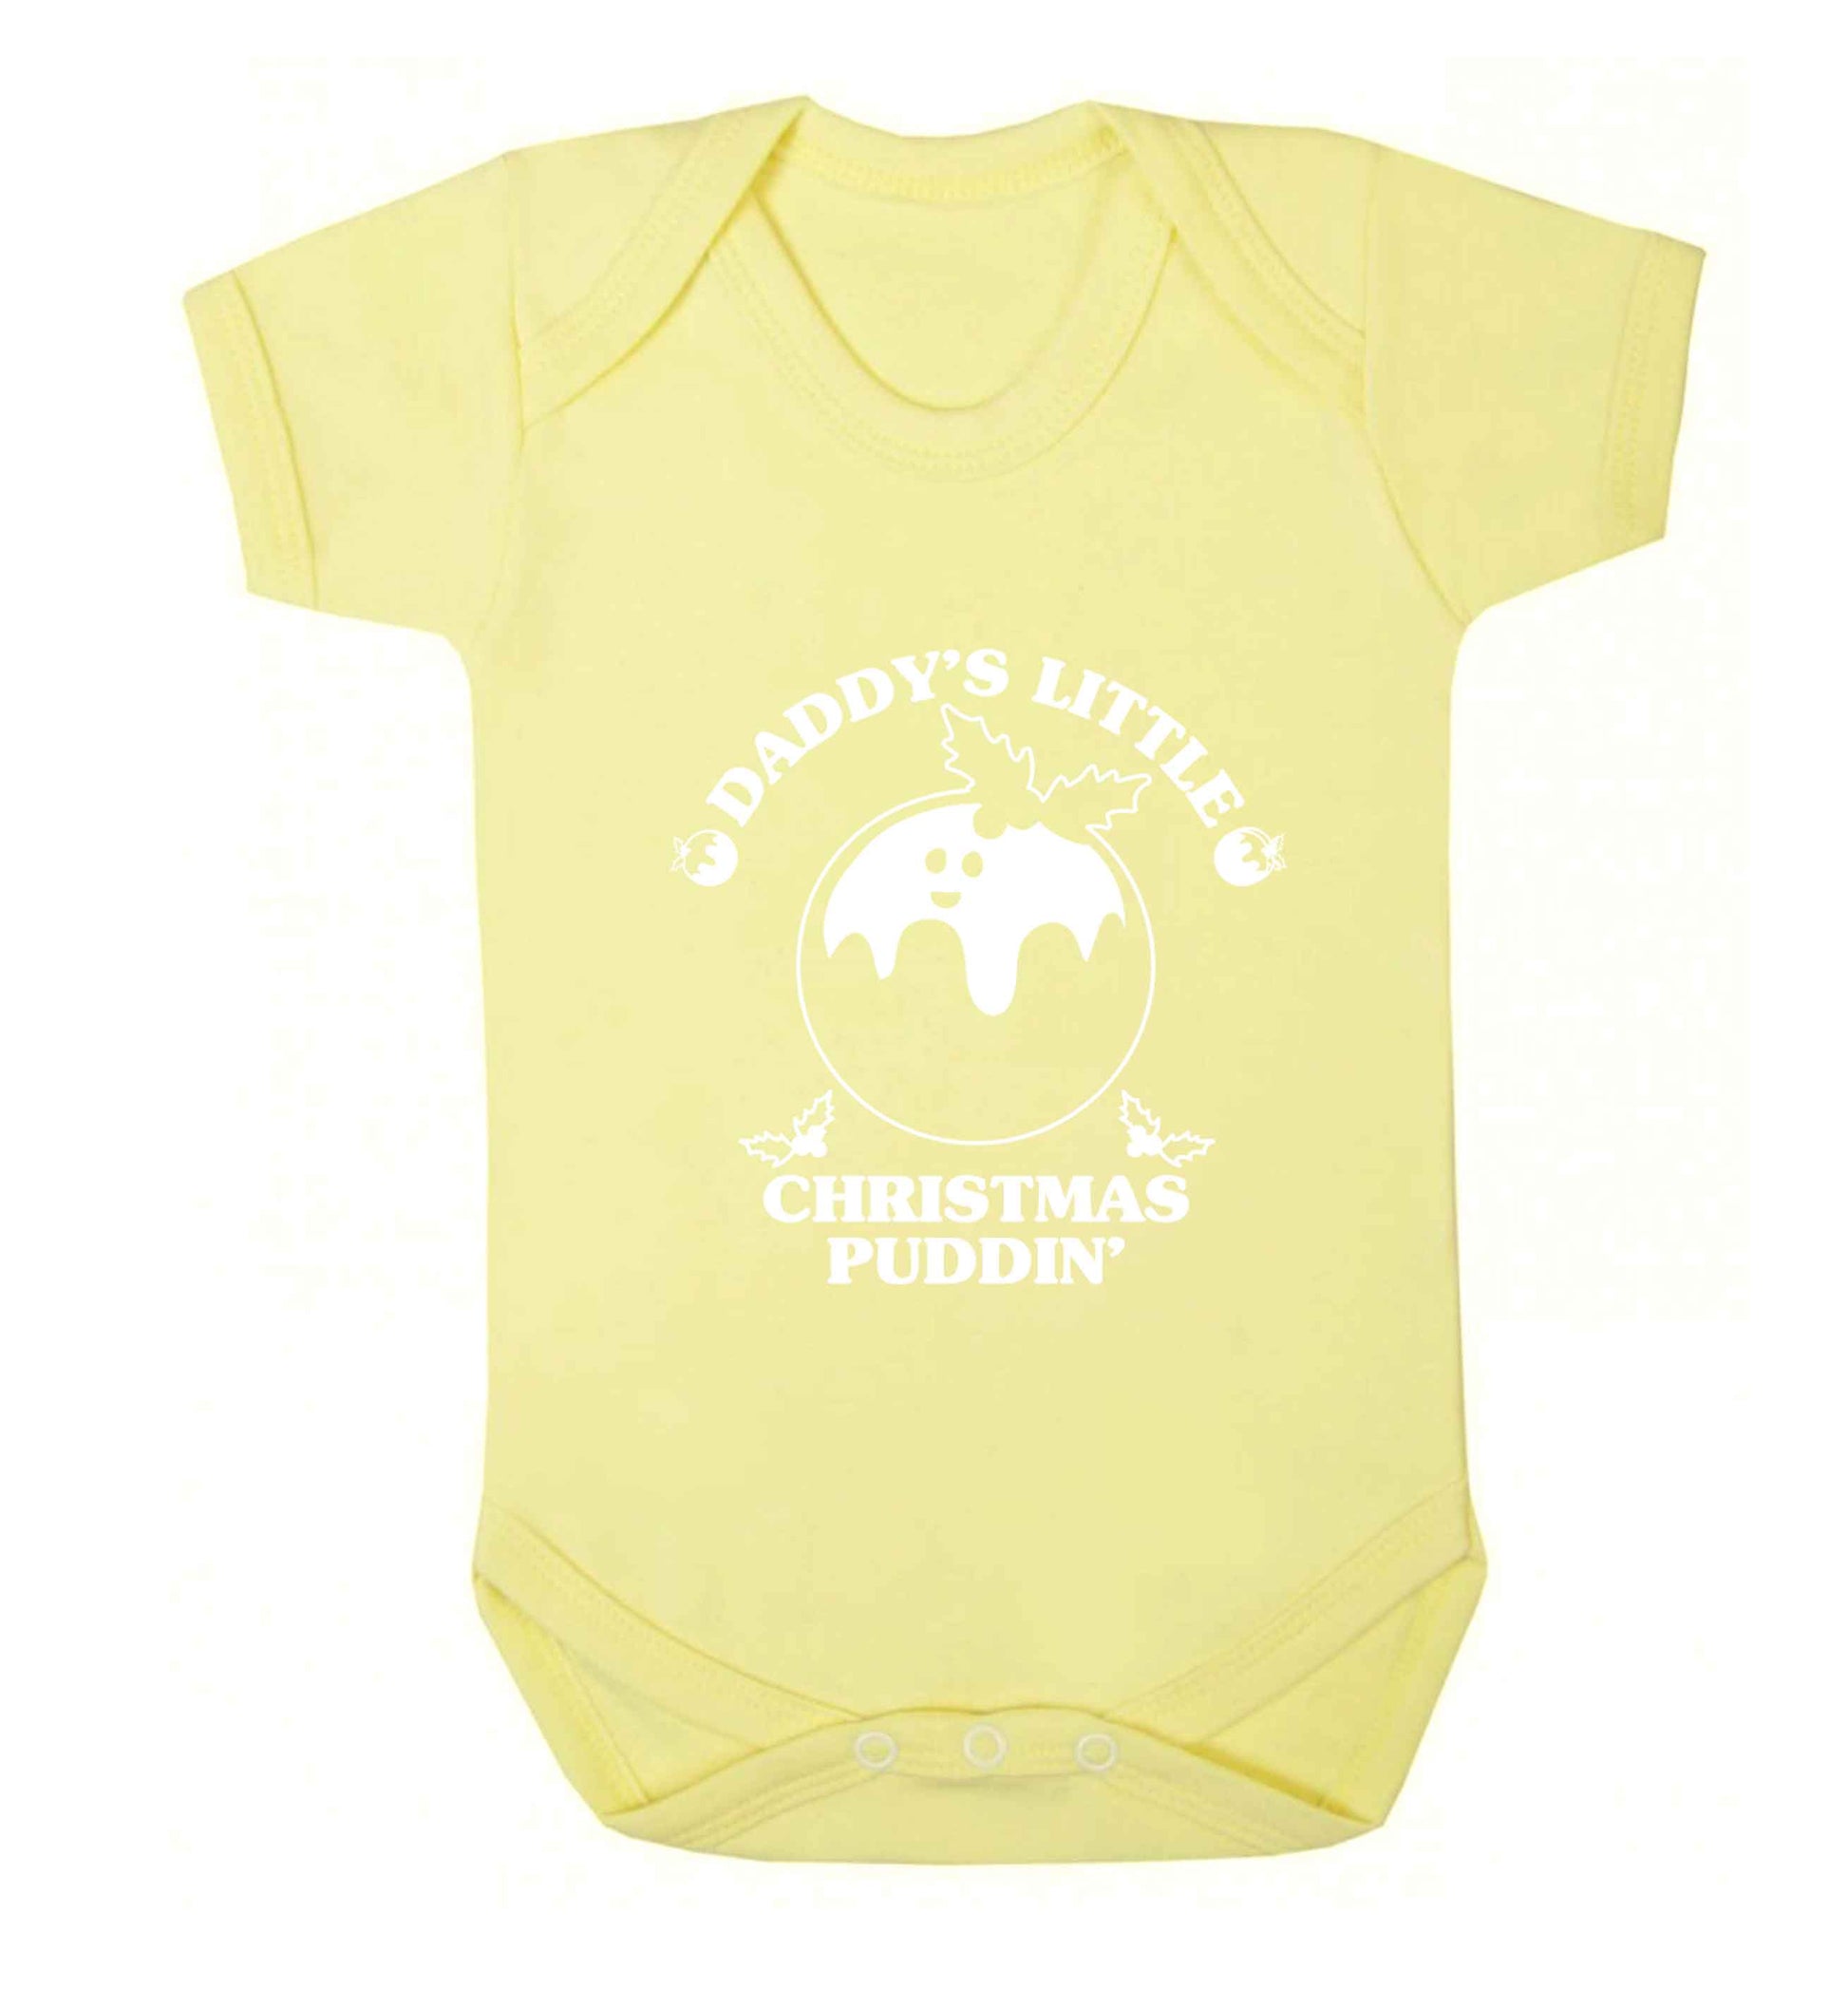 Daddy's little Christmas puddin' Baby Vest pale yellow 18-24 months